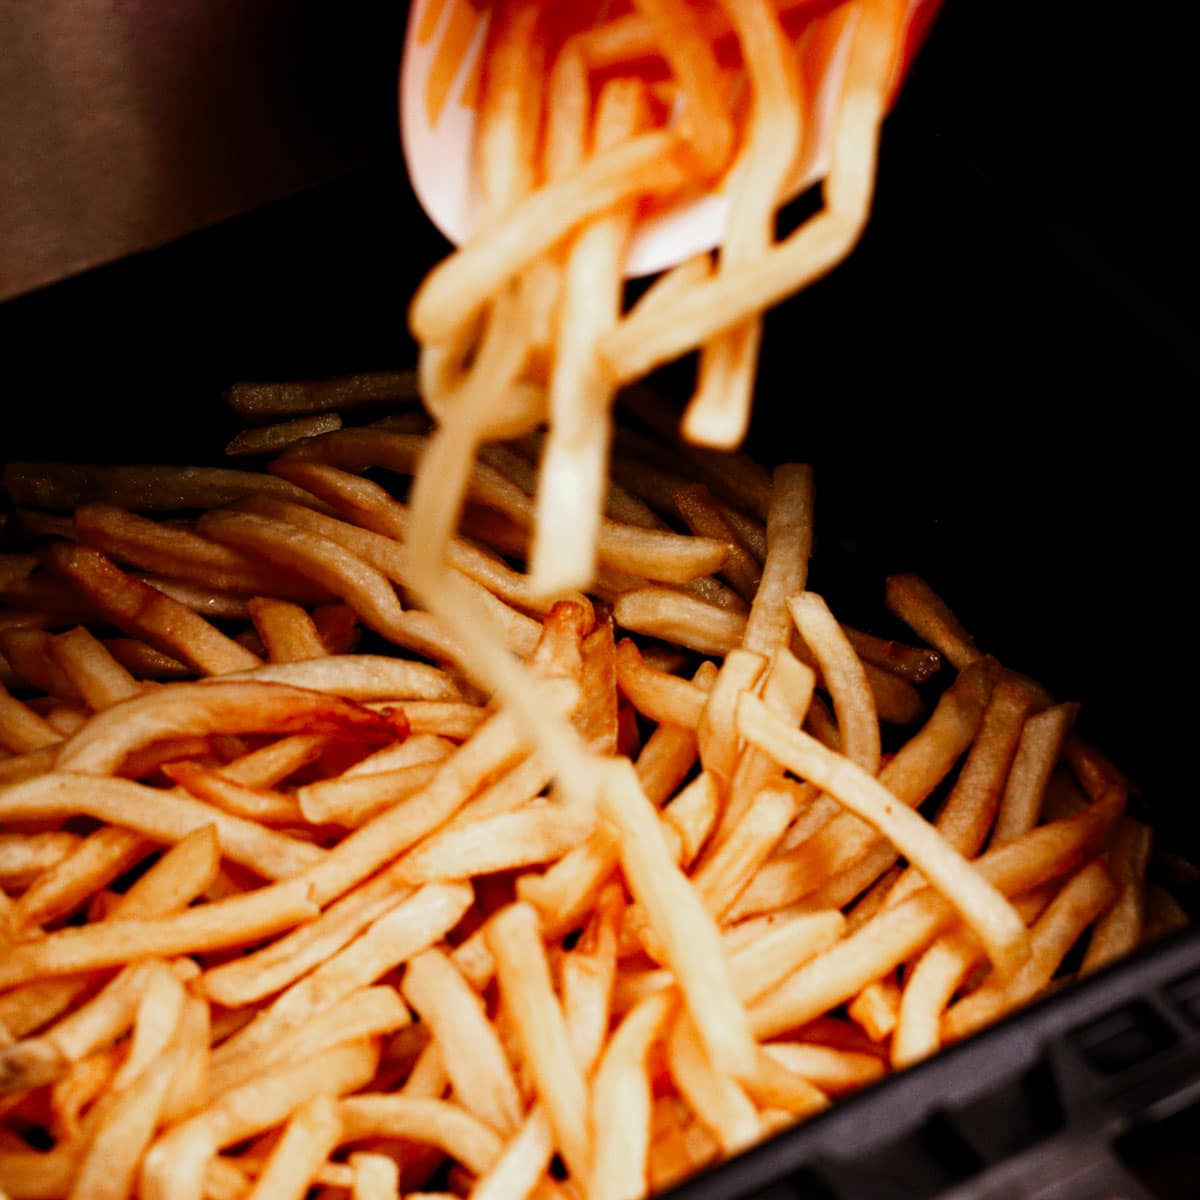 Adding leftover fries to the air fryer basket.